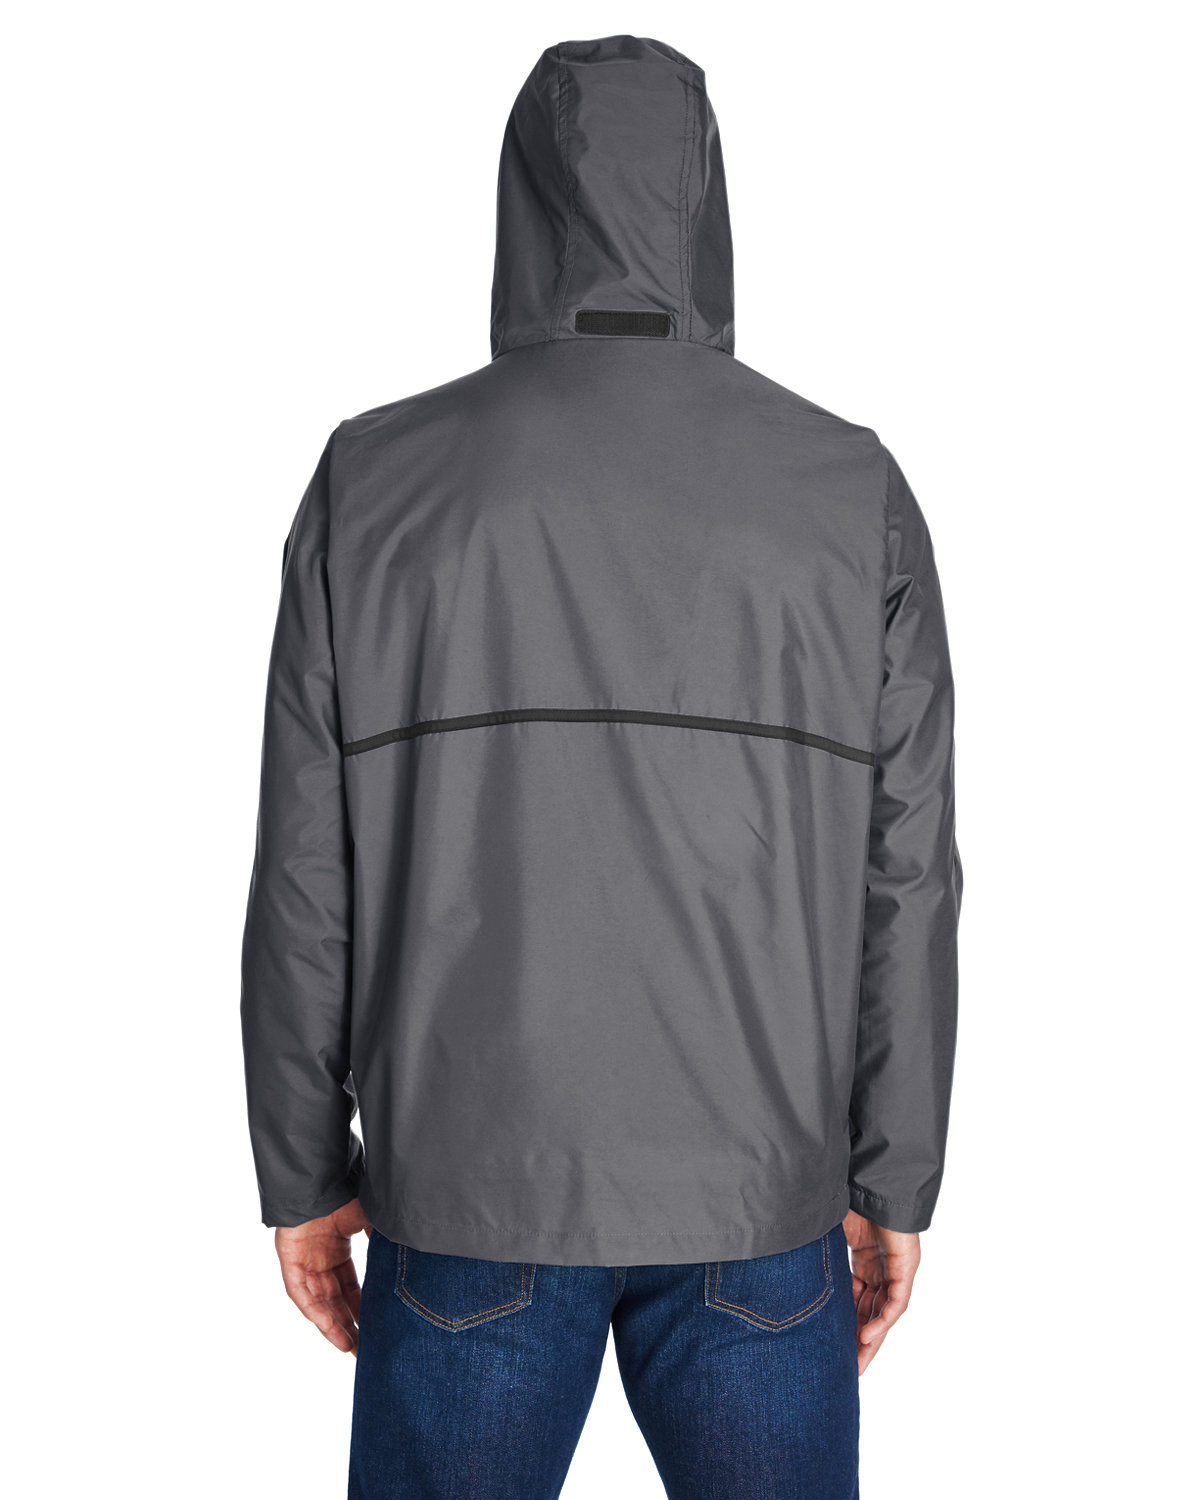 Team 365 Adult Conquest Jacket with Mesh Lining | alphabroder Canada